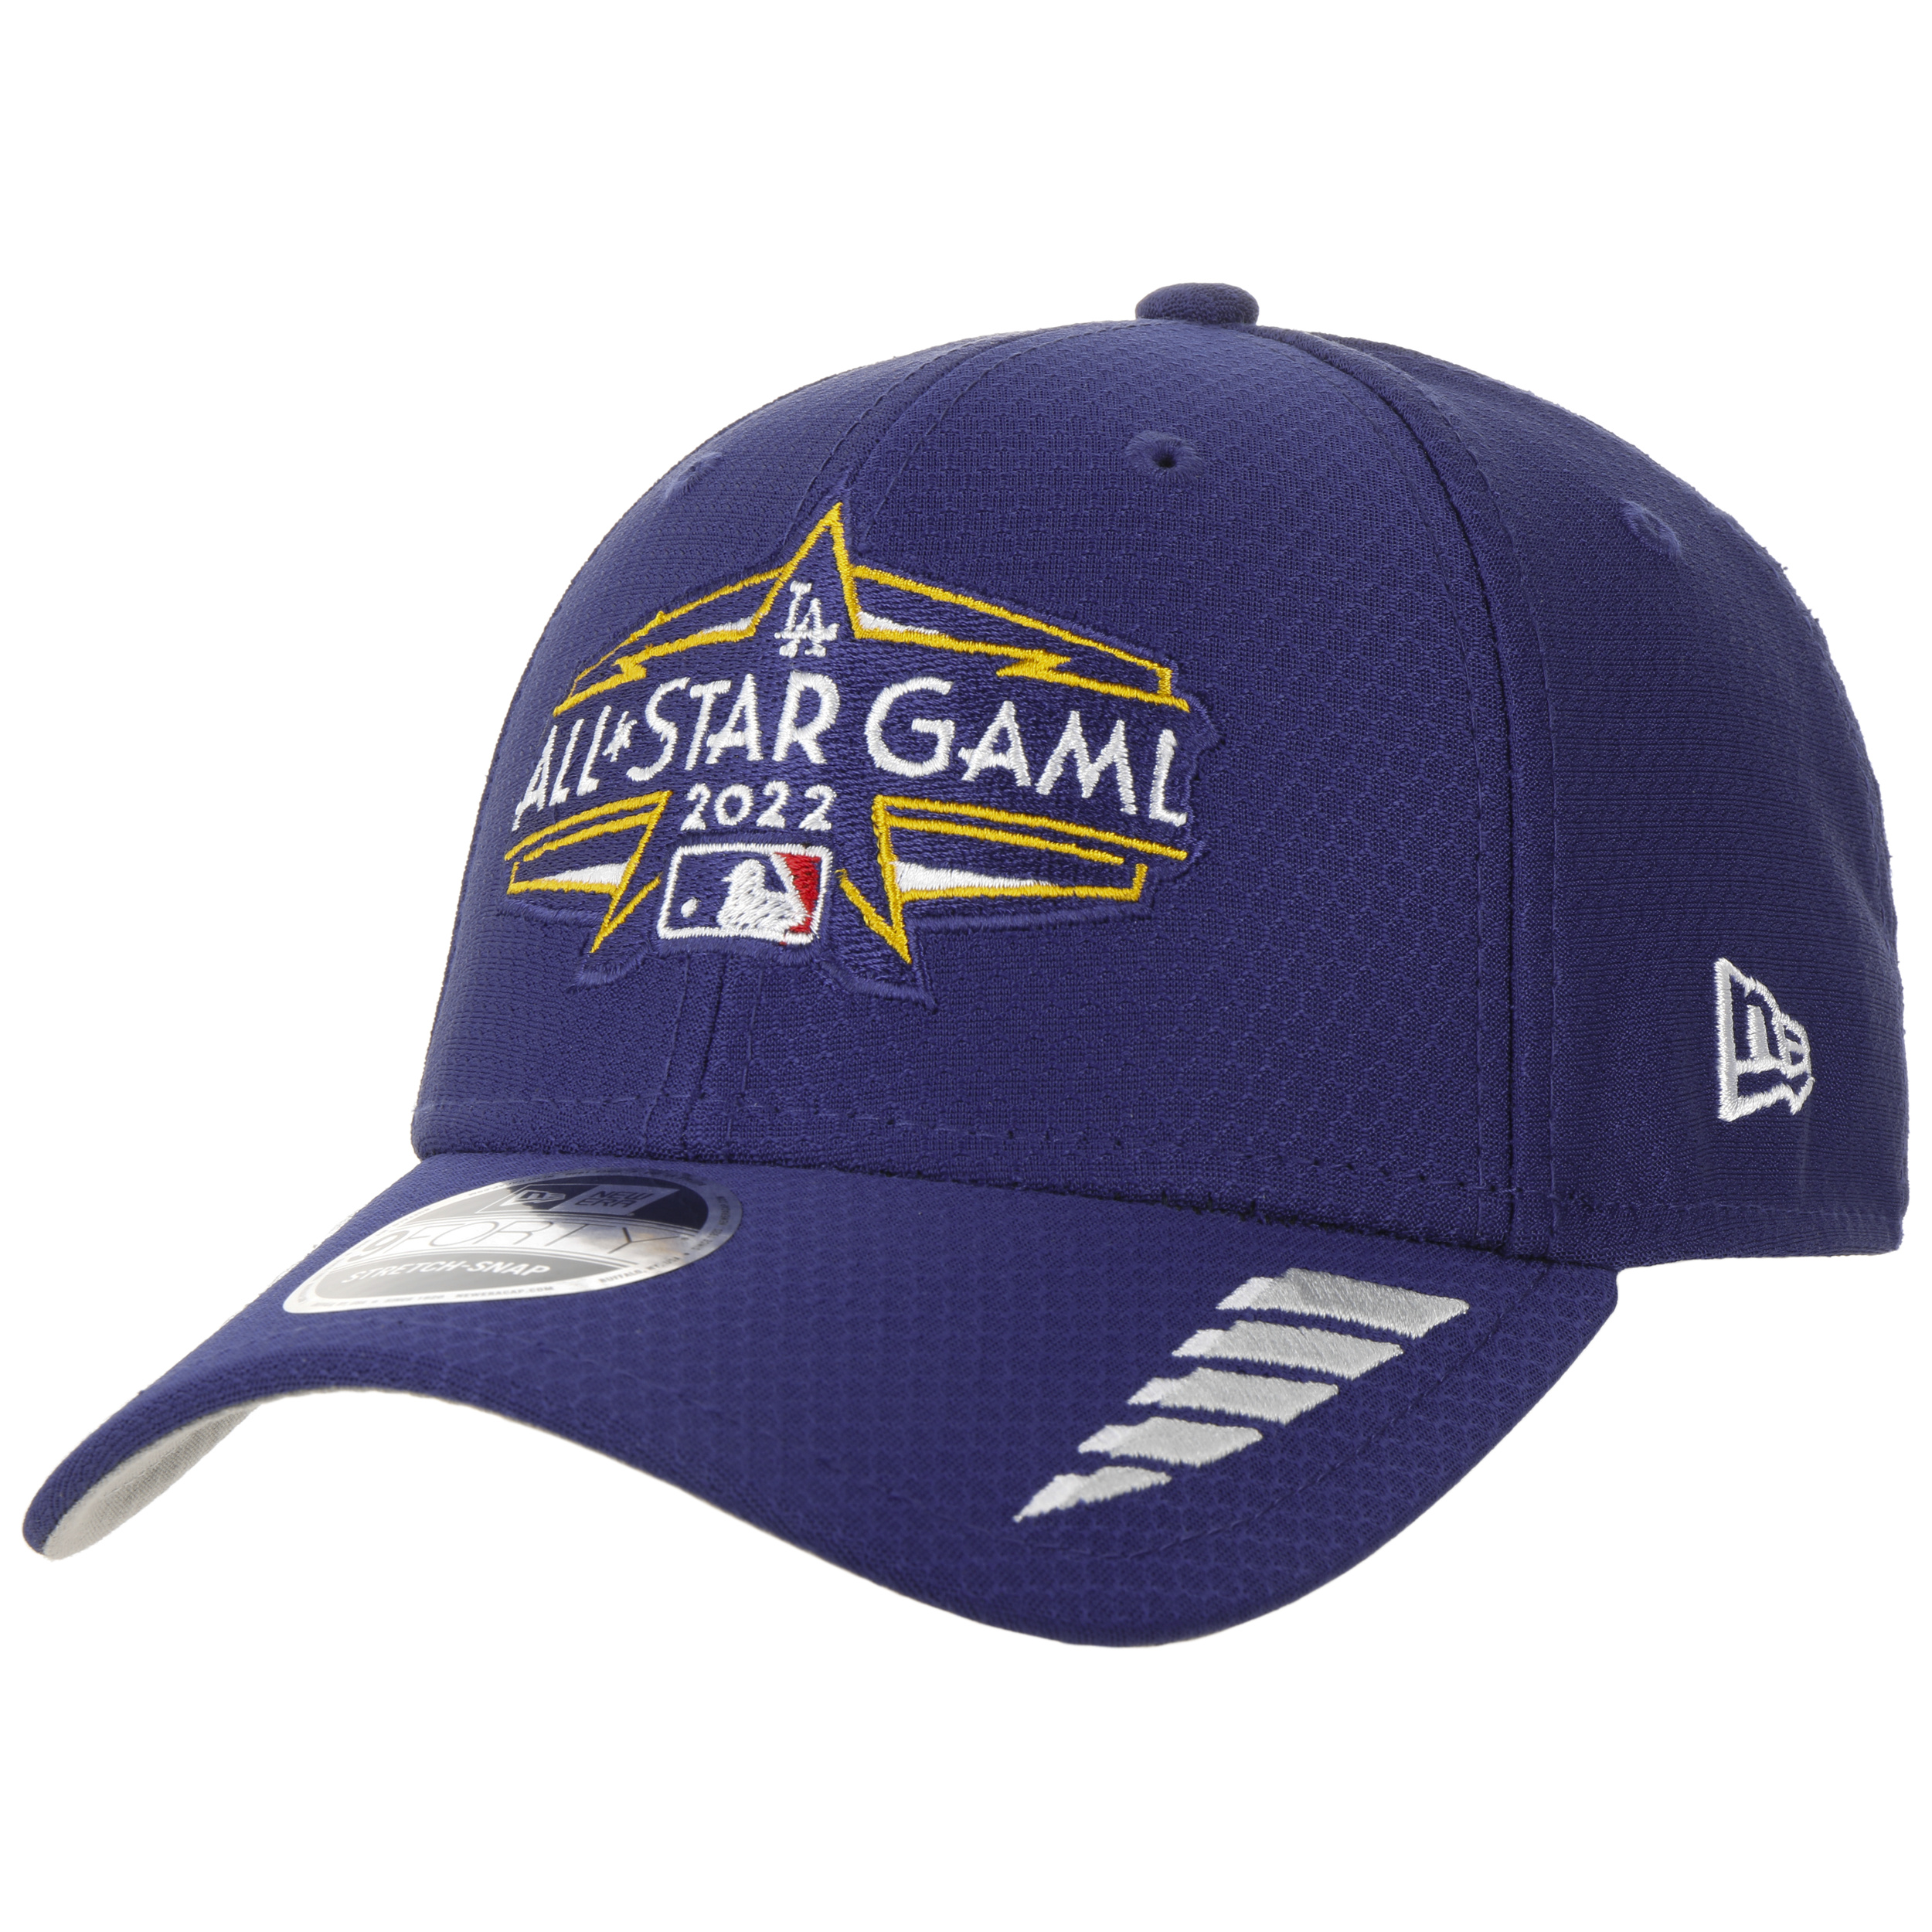 MLB All-Star hats 2023: Design details of special headgear, explained